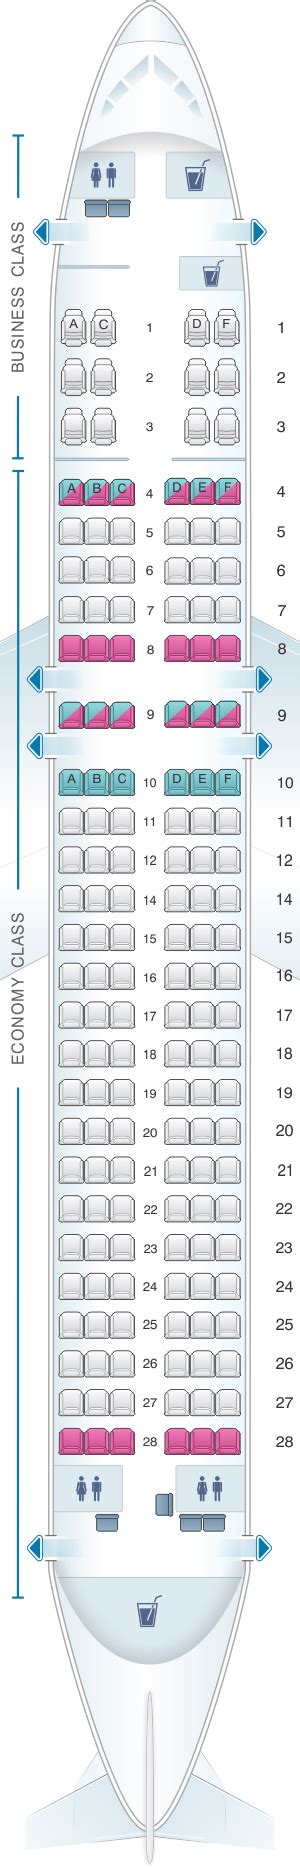 Philippine Airlines A330 Seating Chart Elcho Table